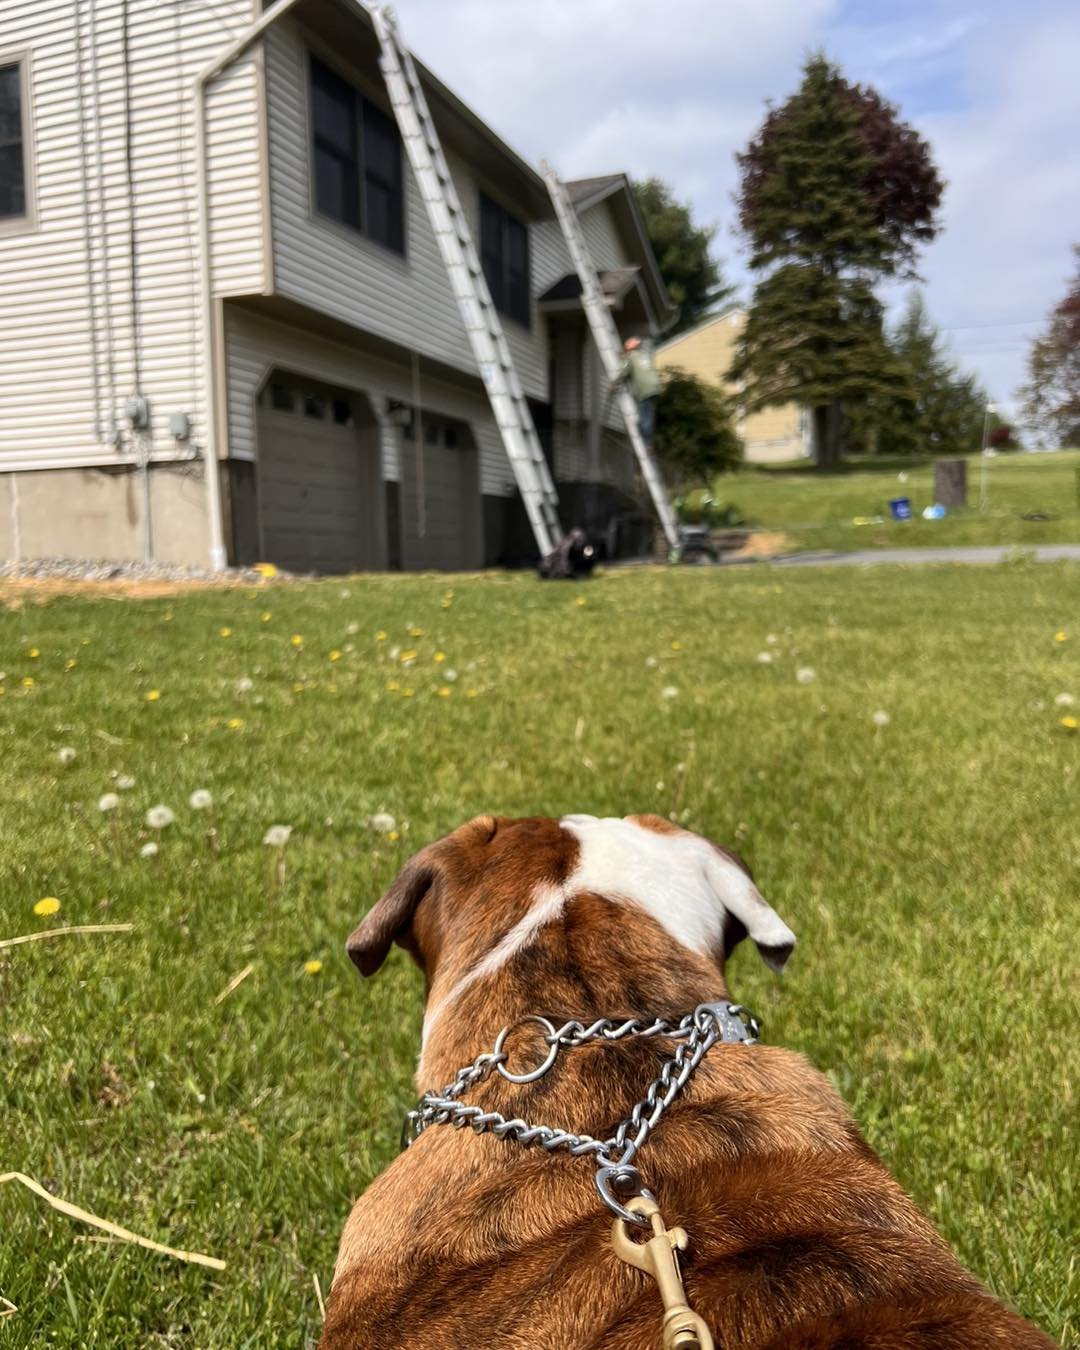 Looks like we've got a new supervisor on the job! 🐶 Meet our adorable 'foreman,' ❤️ Watson Karl, keeping a close eye on the job. Who needs a hard hat when you've got this furry friend to watch over us?

#brotoncontracting #foundedwithpride #distingu